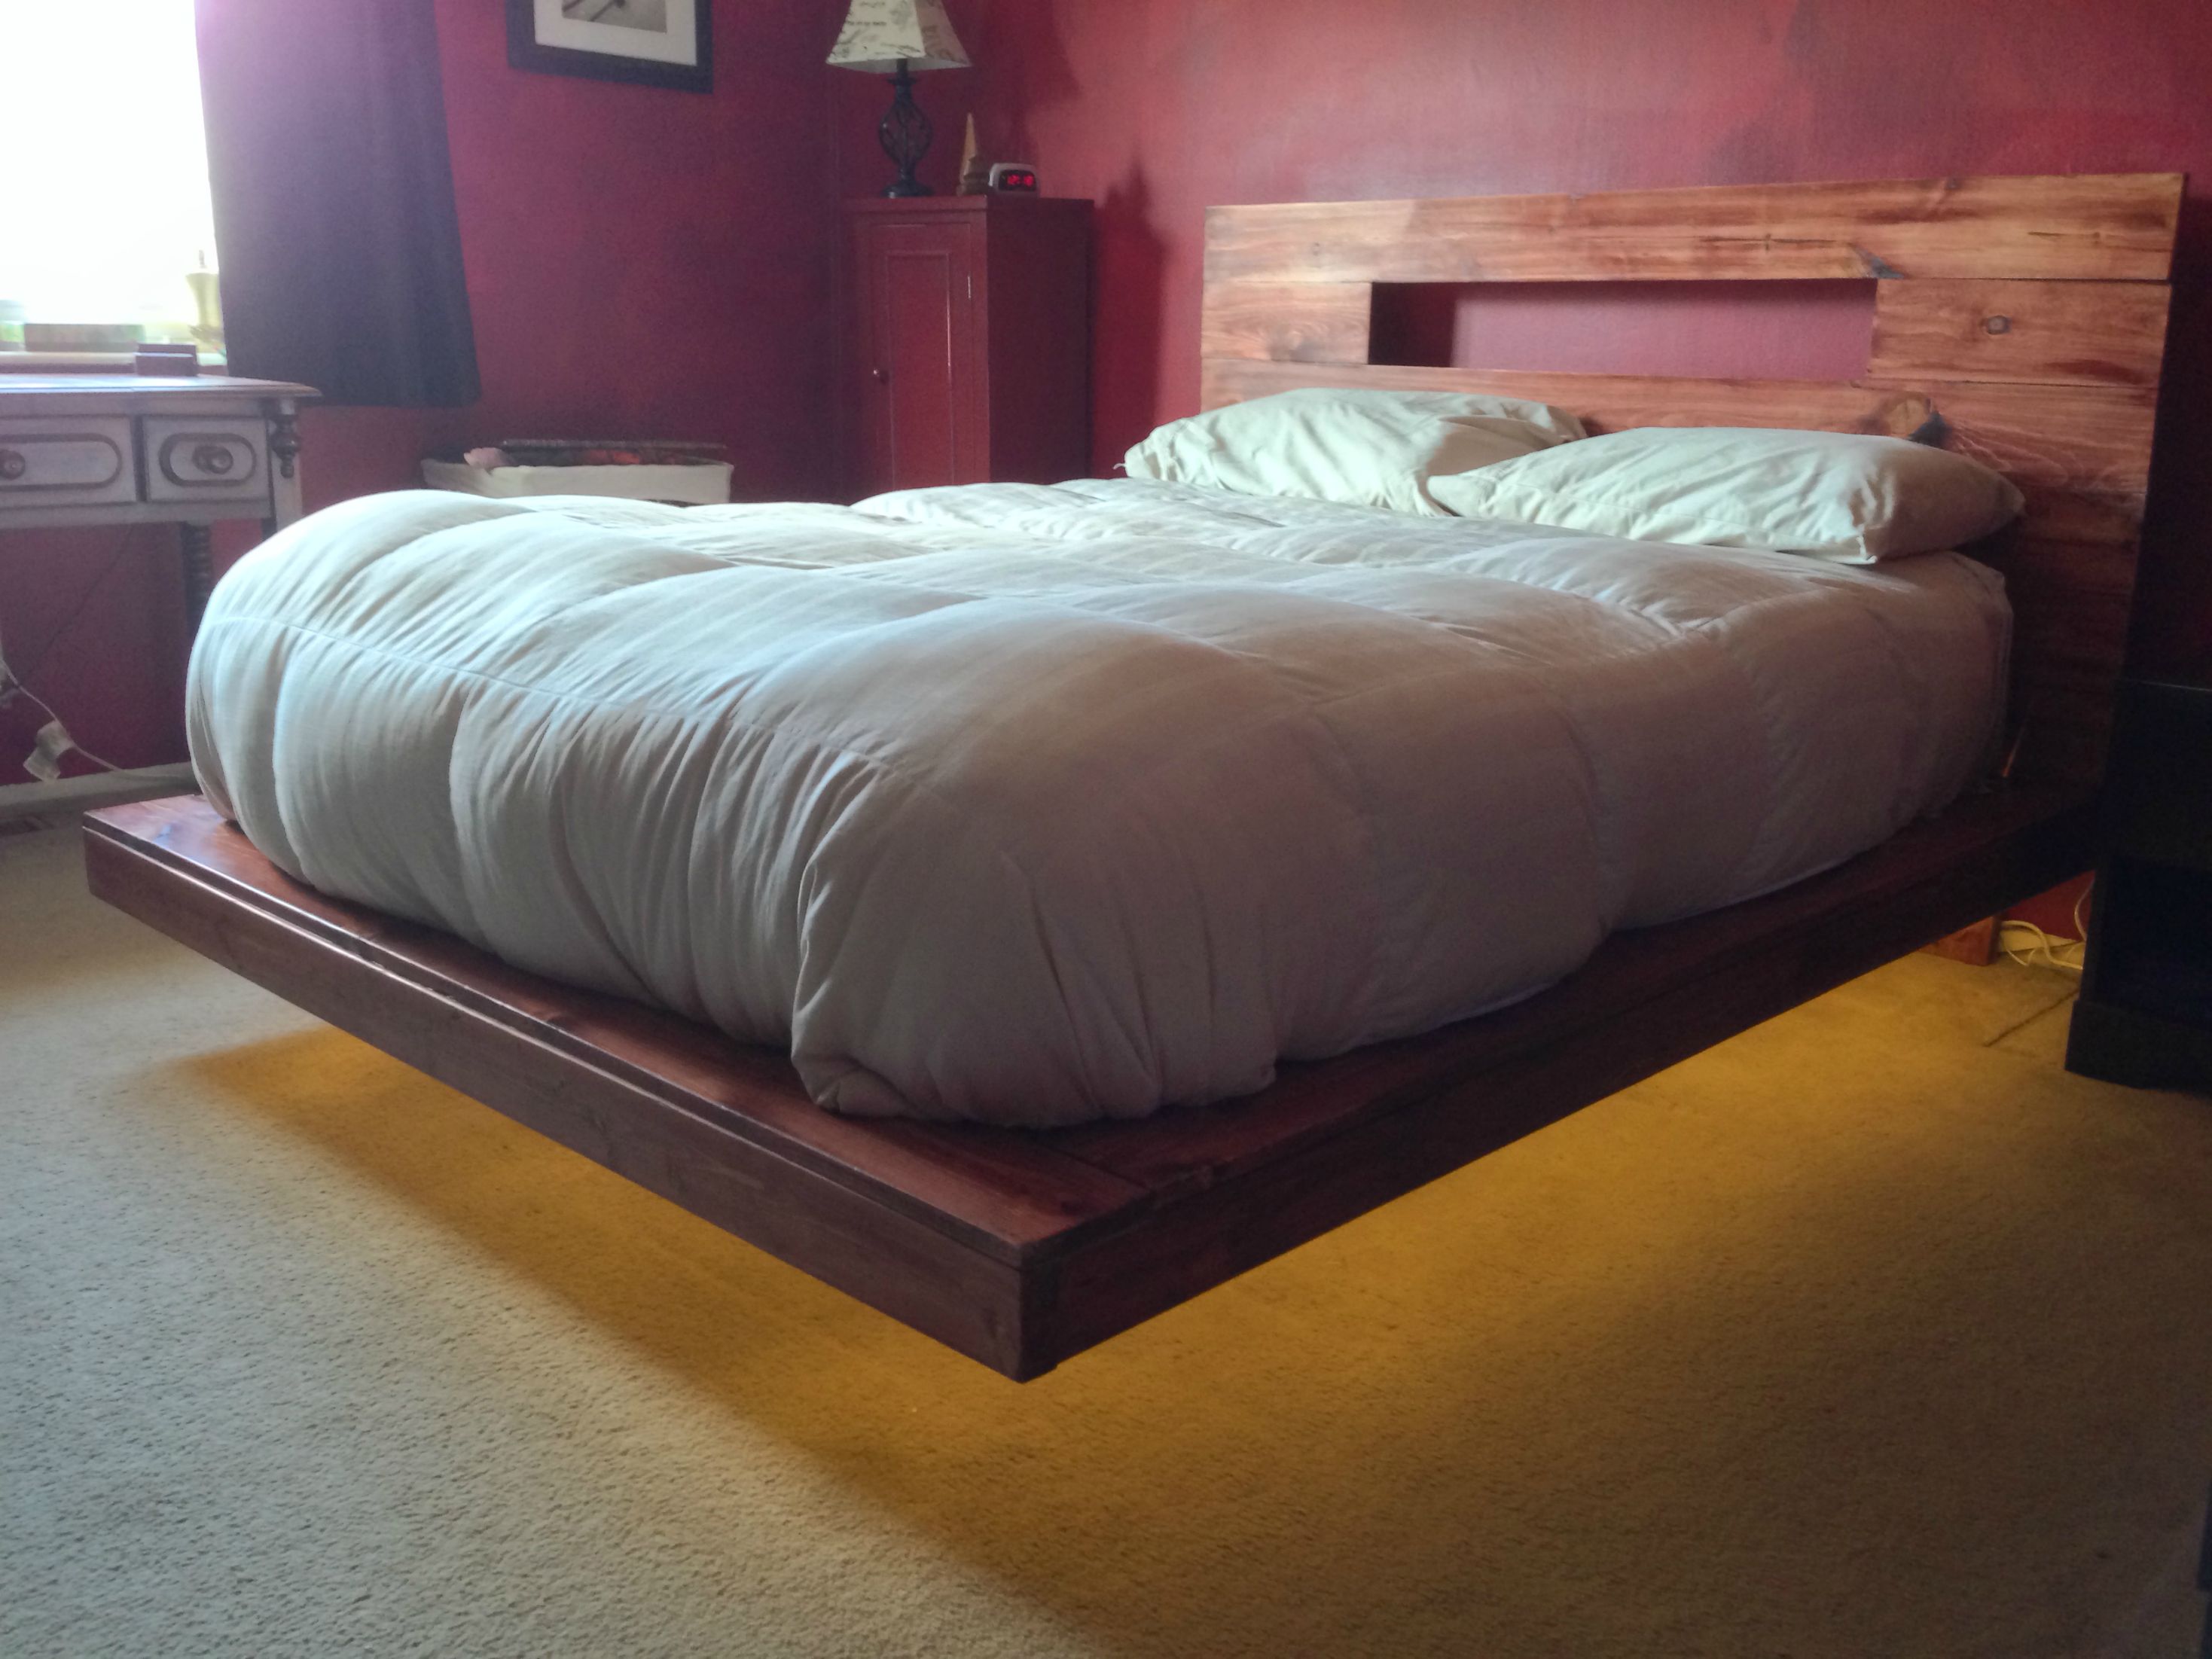 21 Diy Bed Frames To Give Yourself The, How To Make Your Own Bed Frame Out Of Pallets